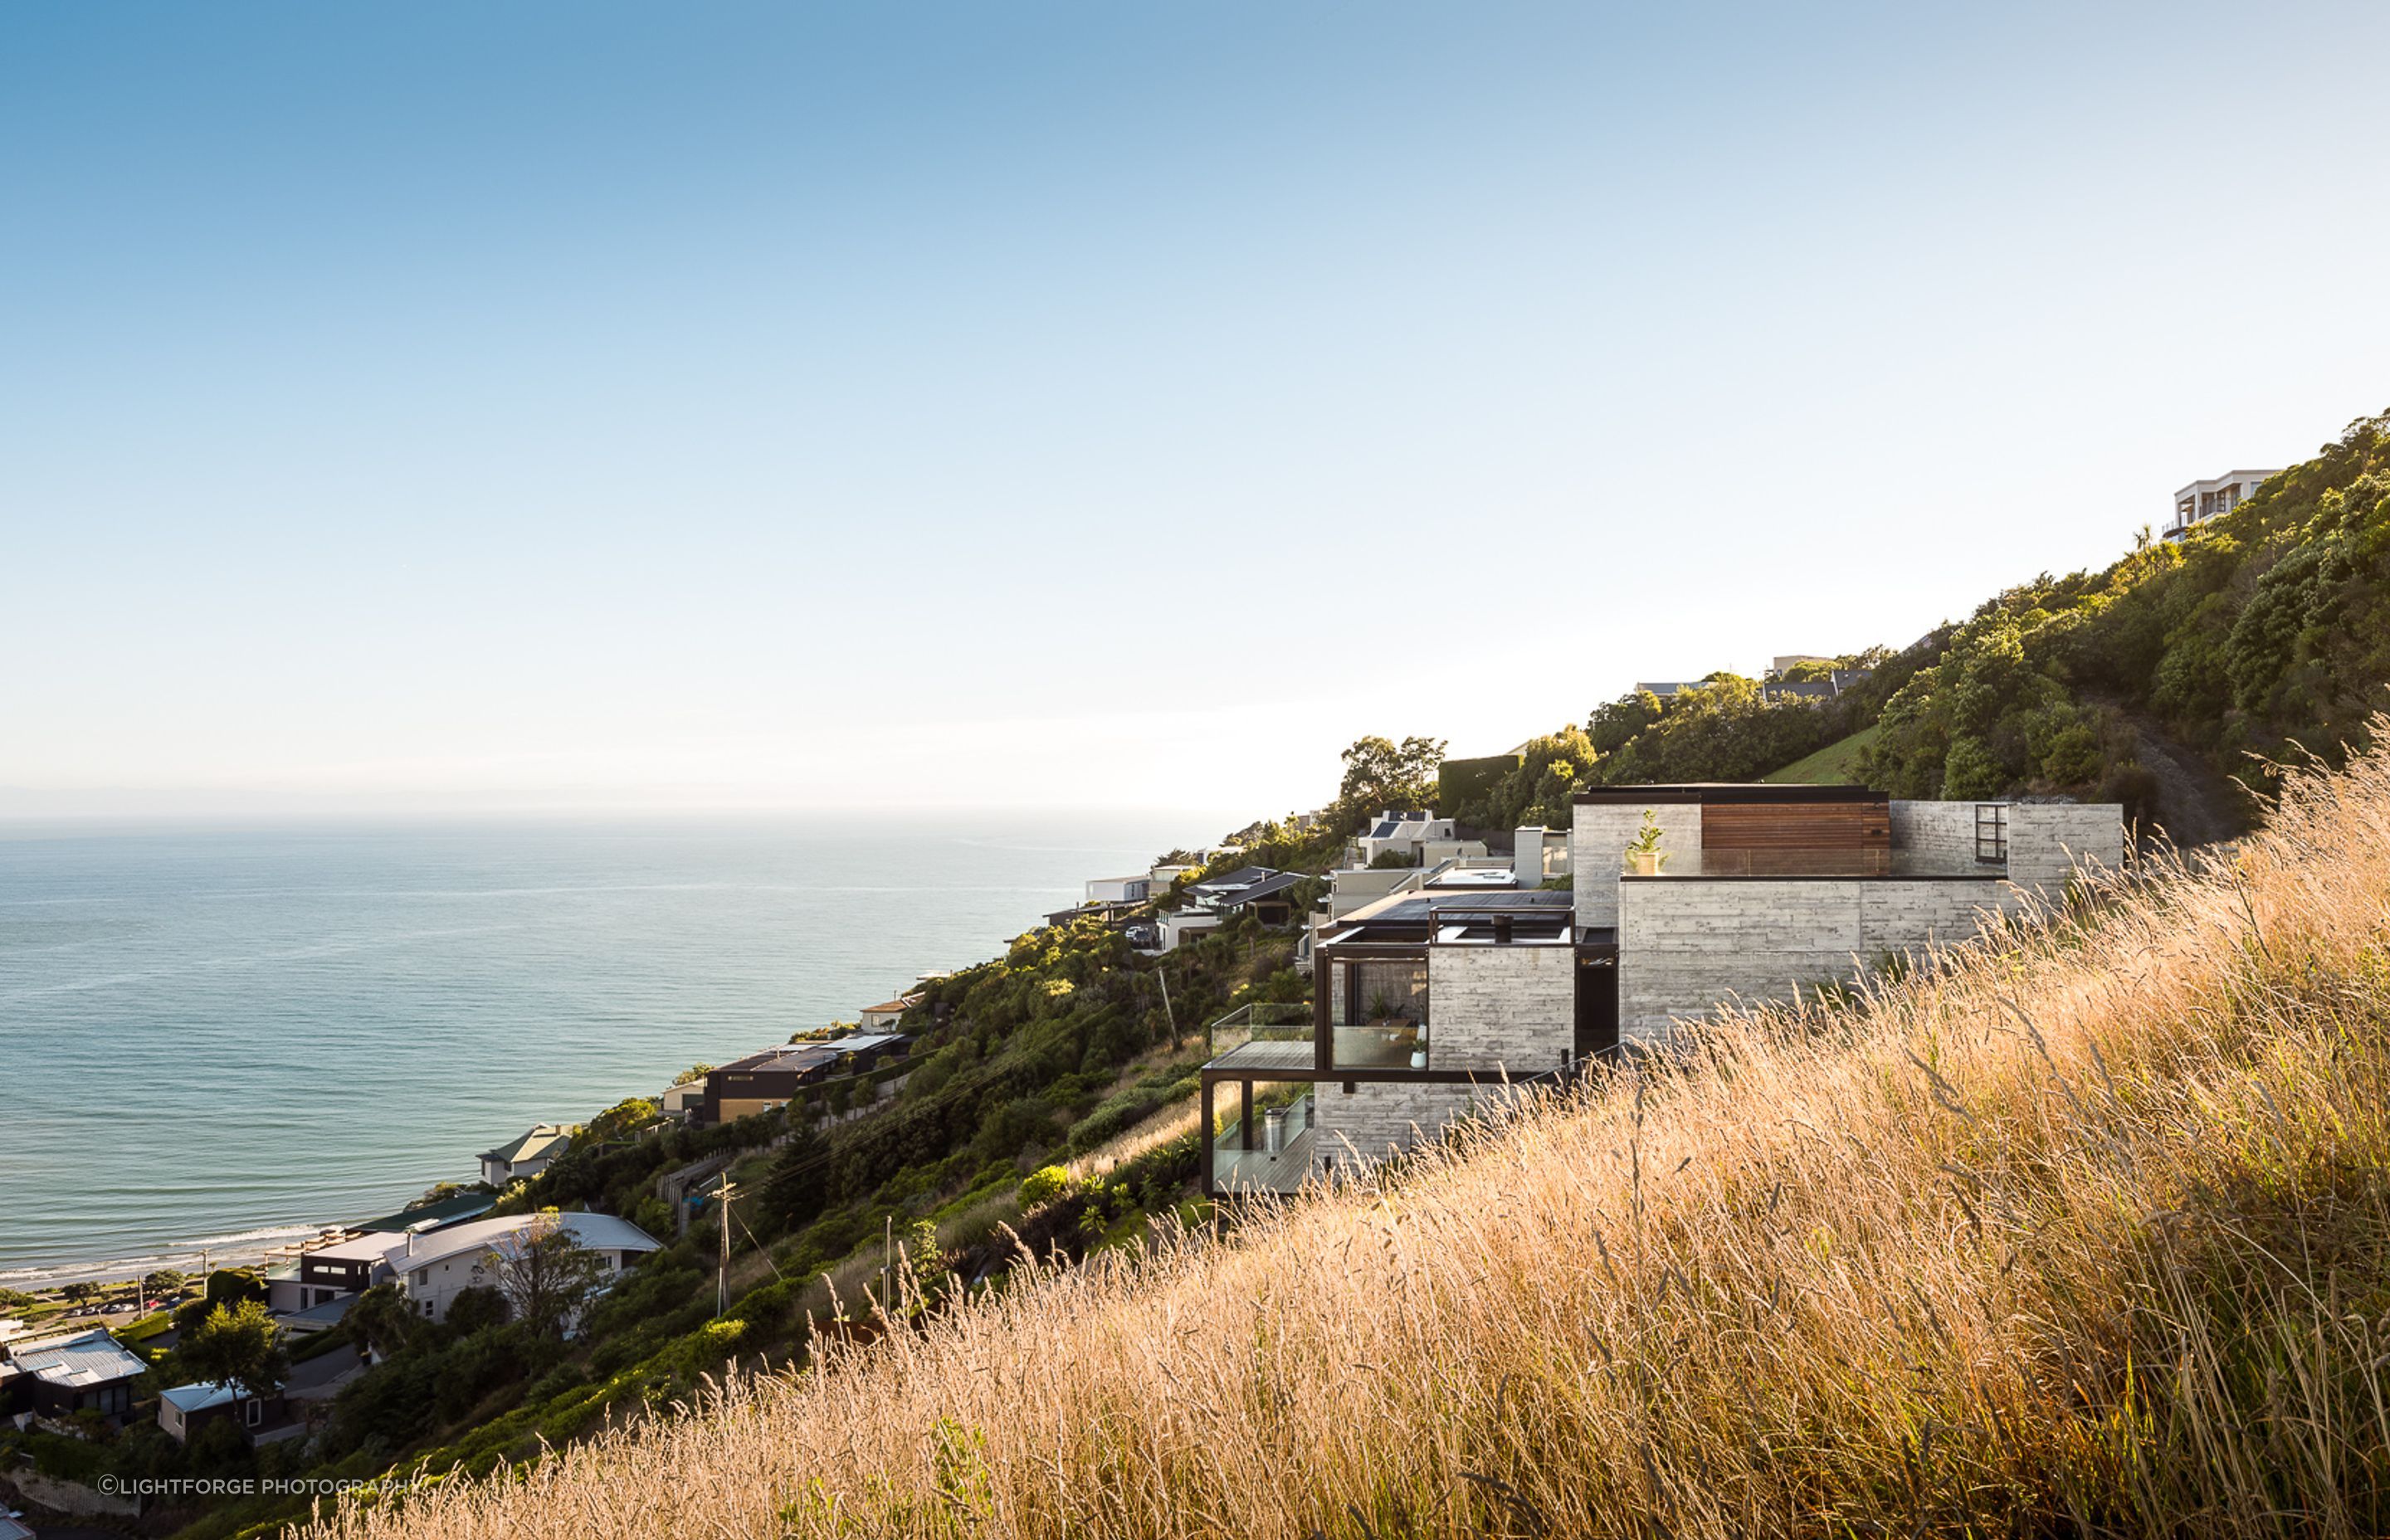 The home faces north-west with breathtaking views across the Pacific Ocean, returning along the Southern Alps over Christchurch city.